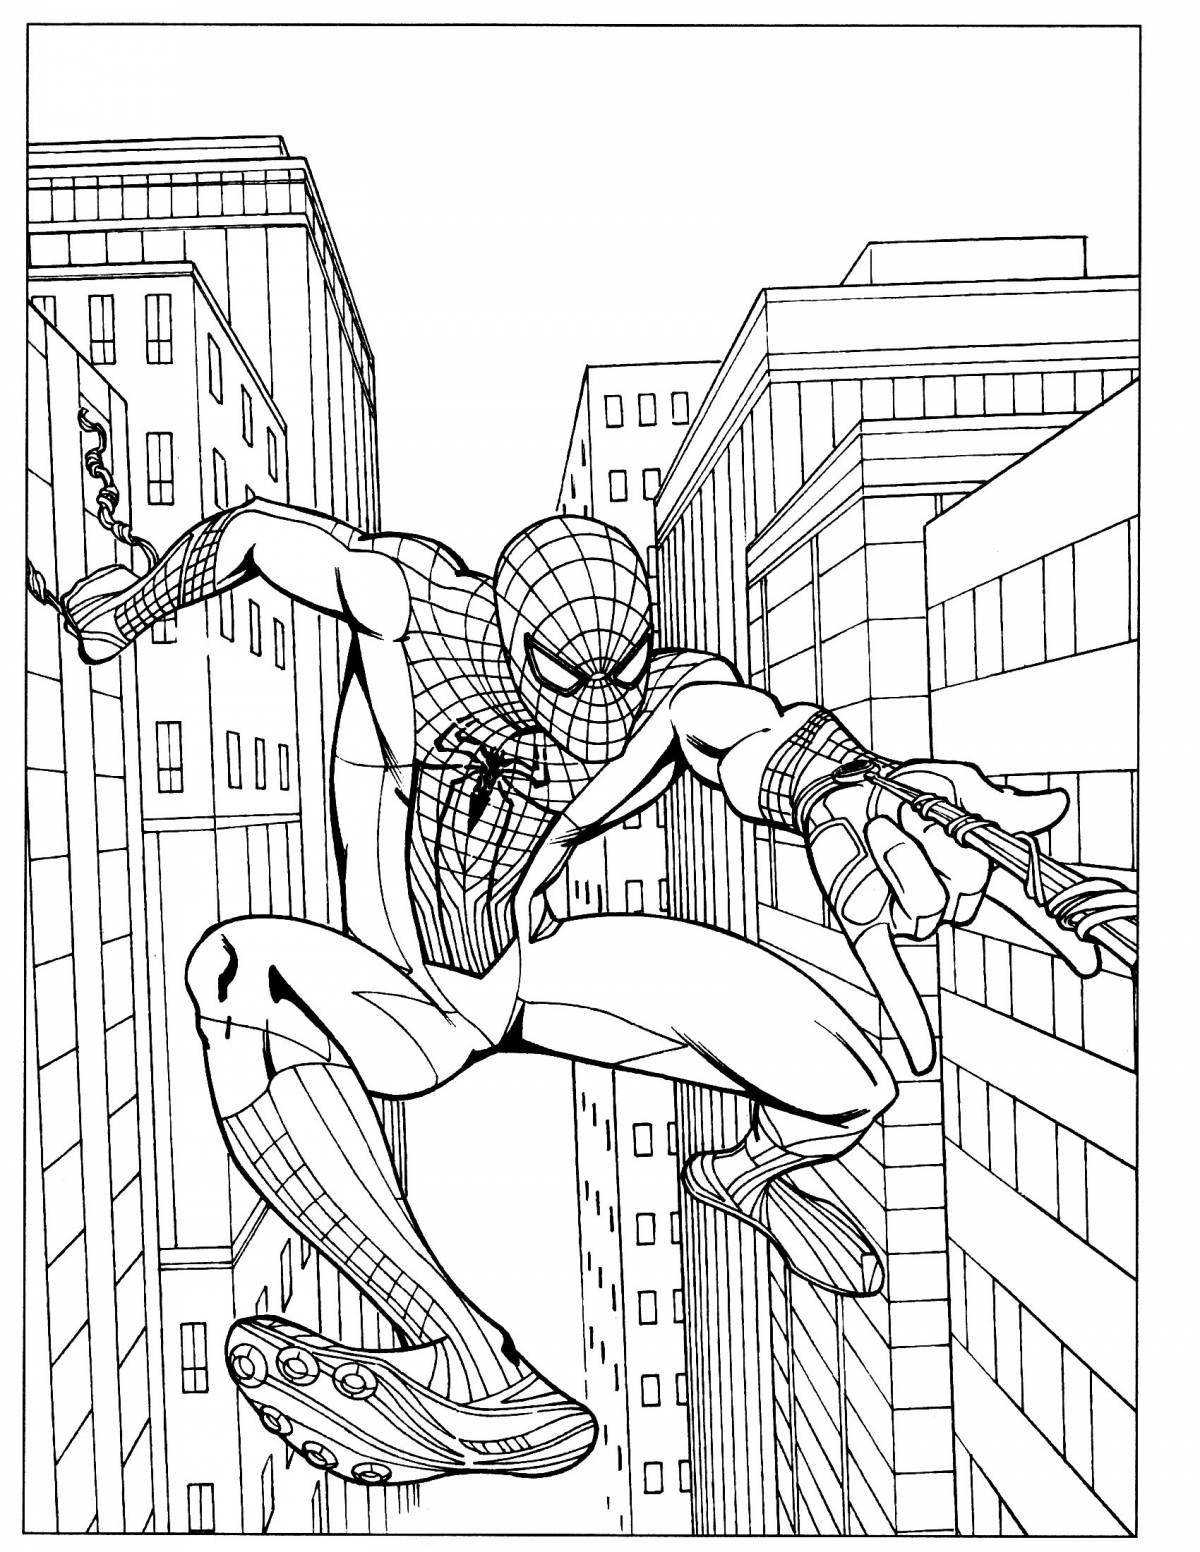 Spider-Man playful team coloring page